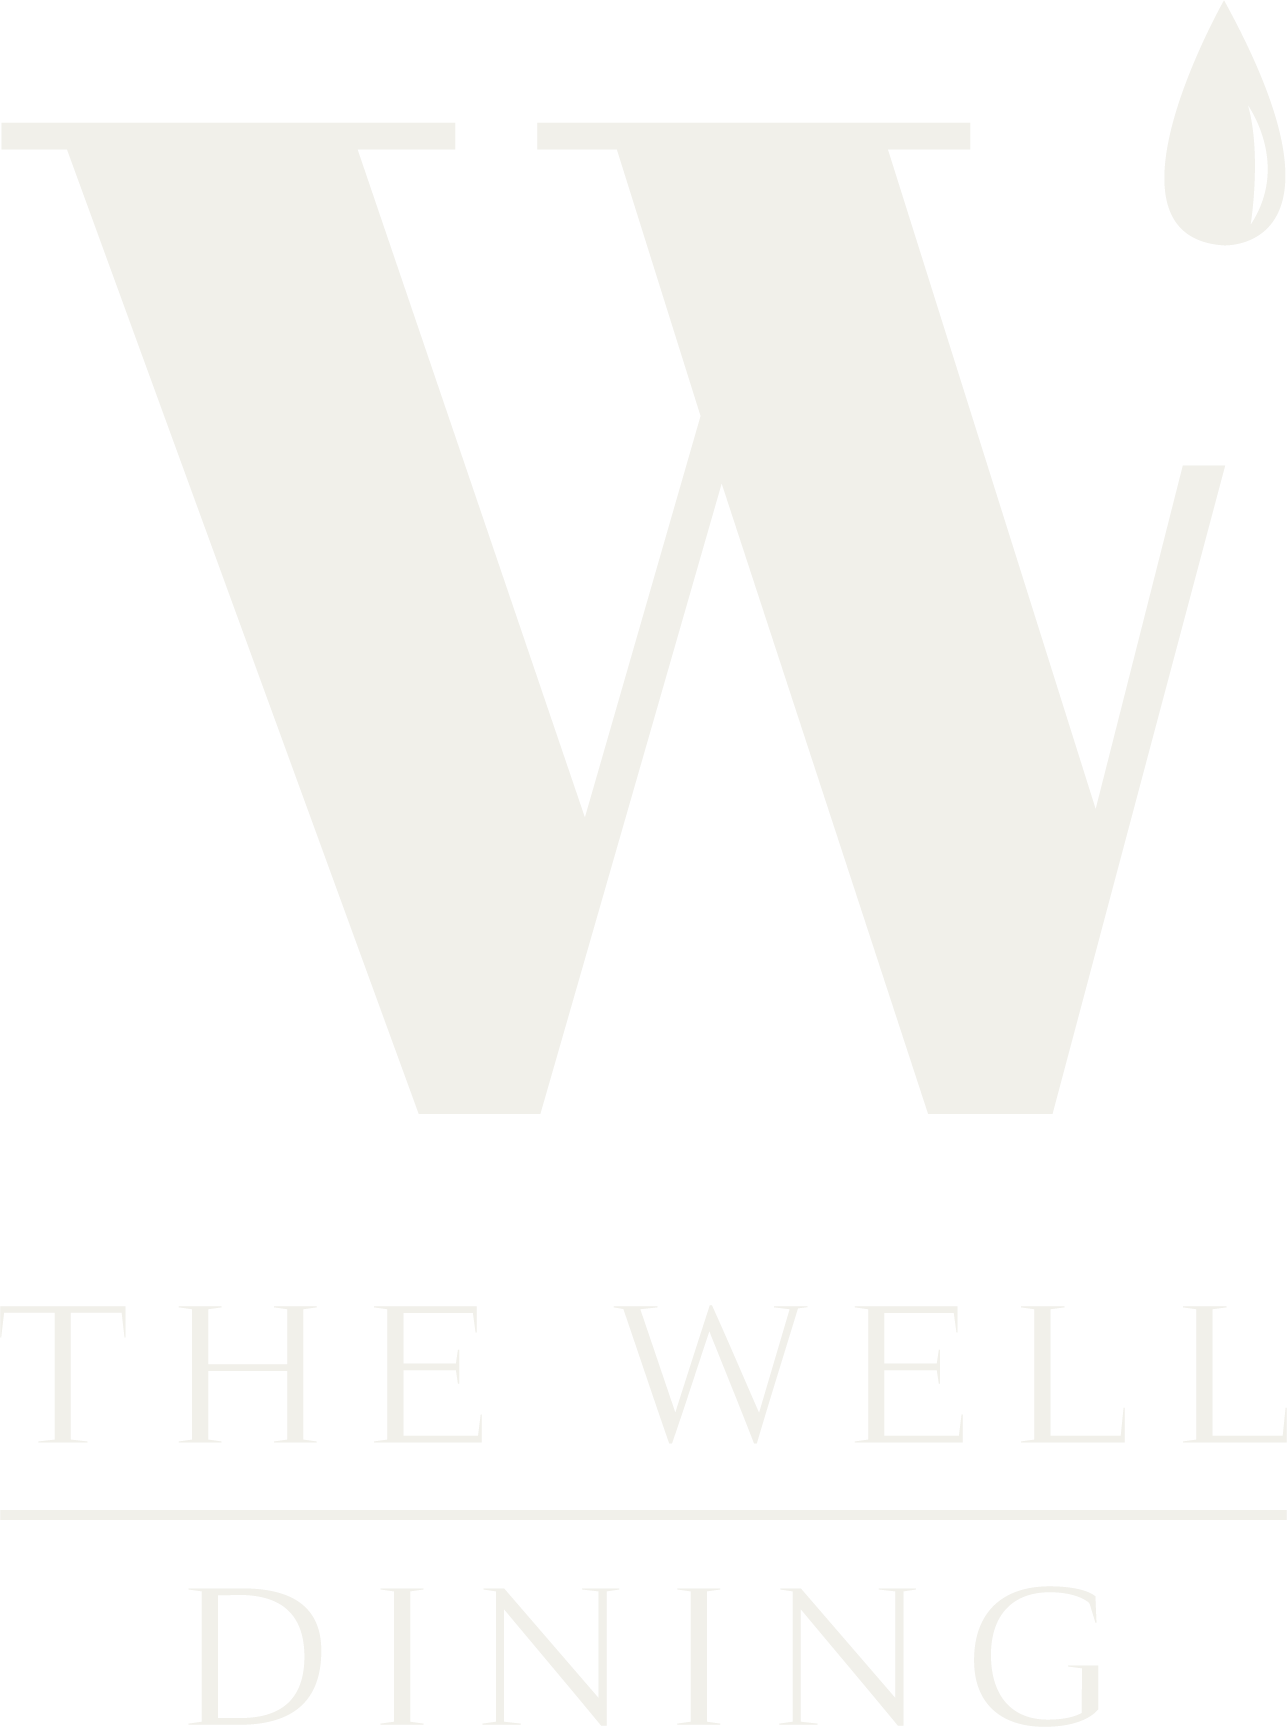 The Well Dining logo.